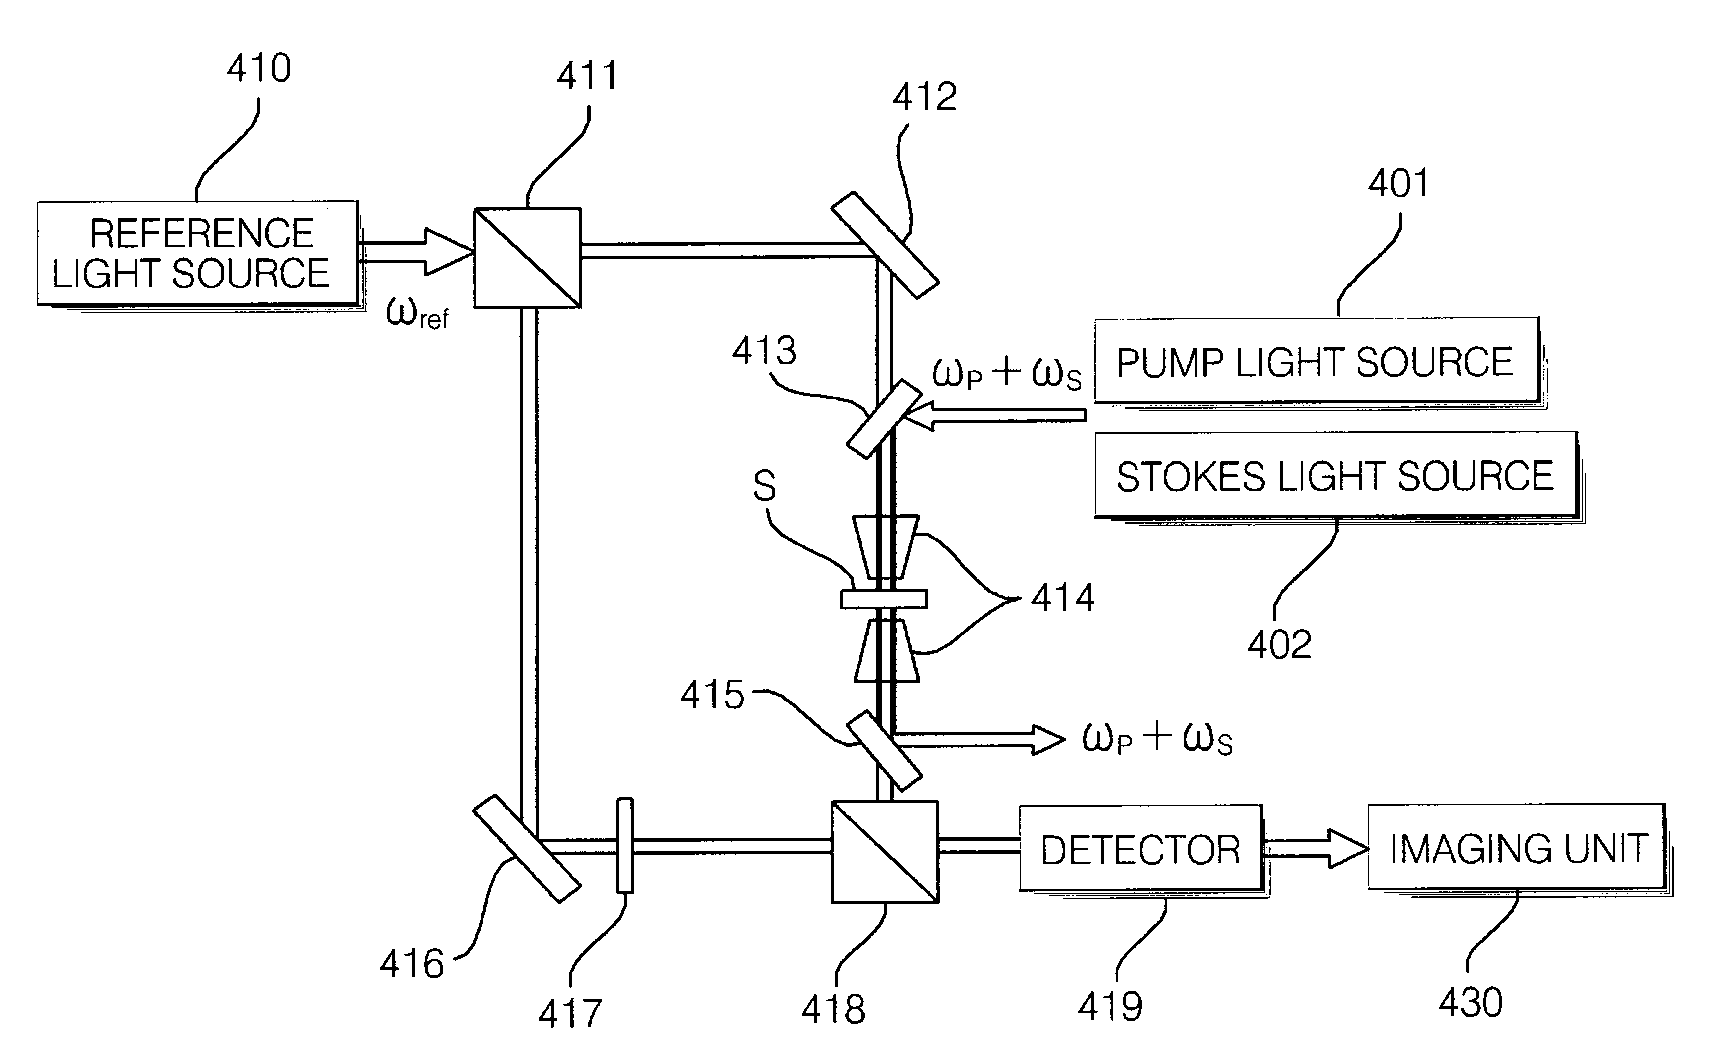 Apparatus and method for obtaining images using coherent anti-stokes Raman scattering